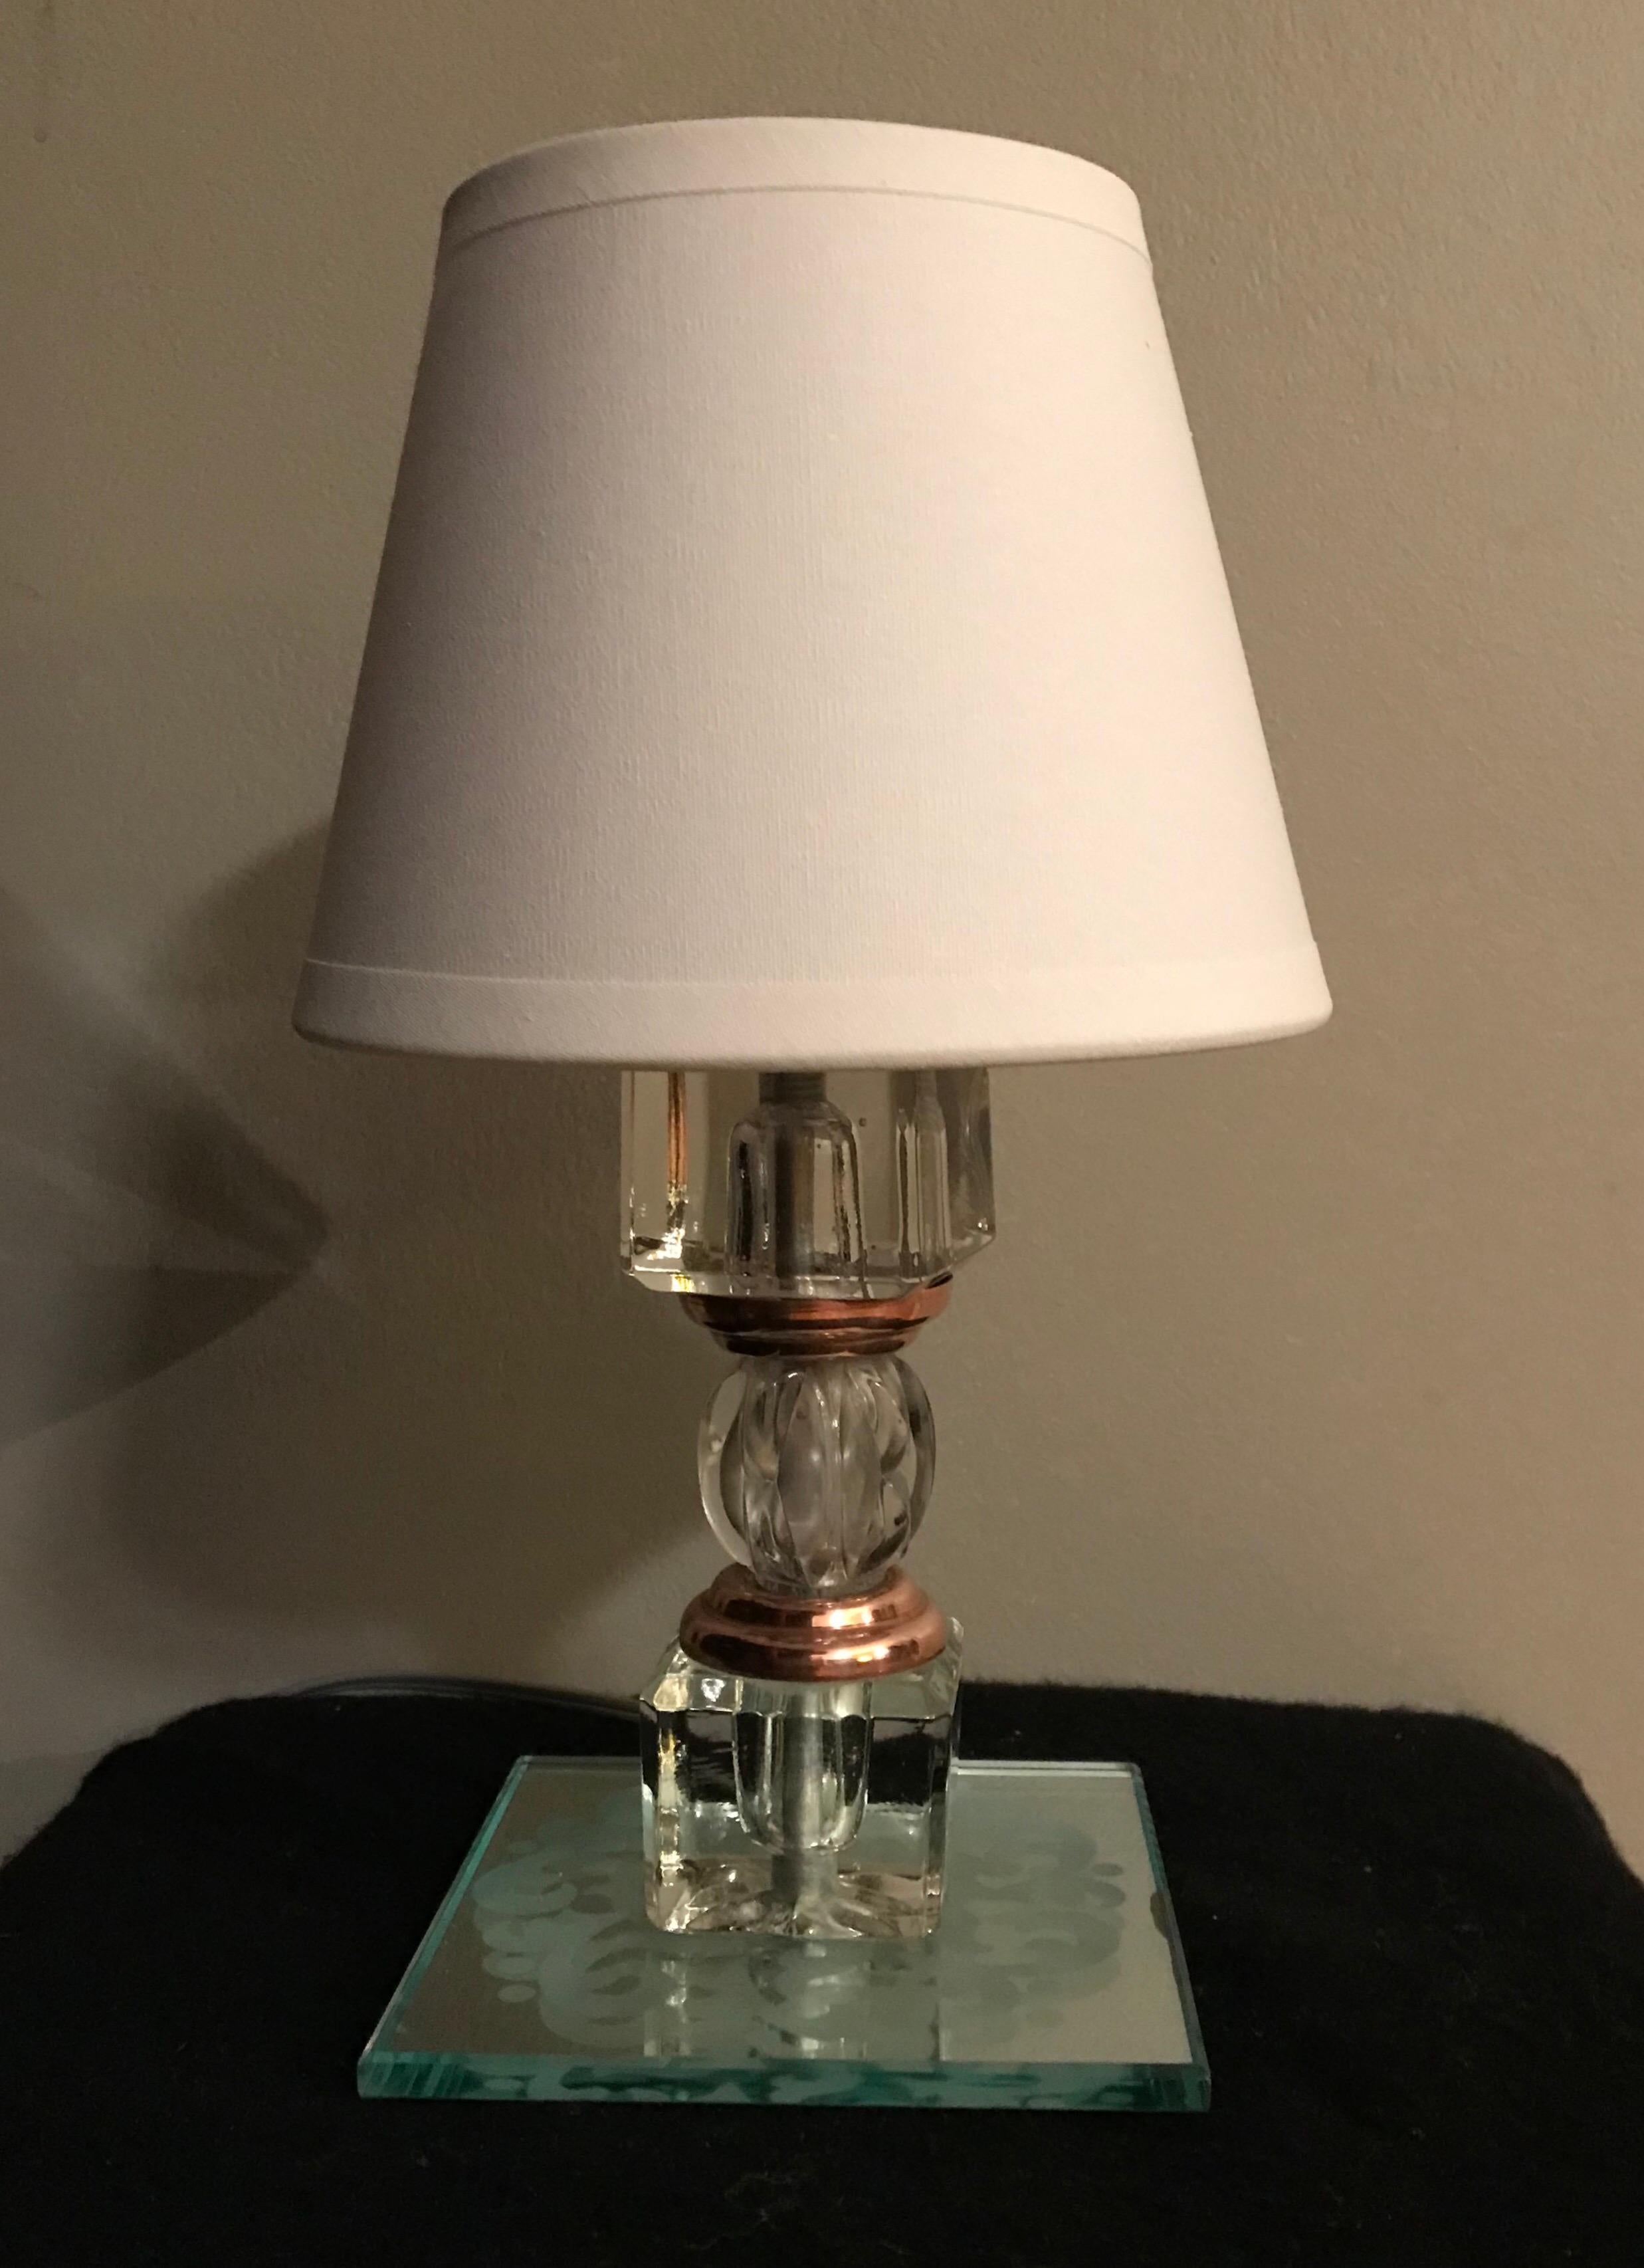 Elegant lamp 2 crystal Adnet style in cut glass and copper with a new cotton lampshade. Very good general condition.
Measures: H 28 cm x d 15.5 cm
Without the lampshade H 21 cm x D 6 cm
Base 12 cm x 12 cm.